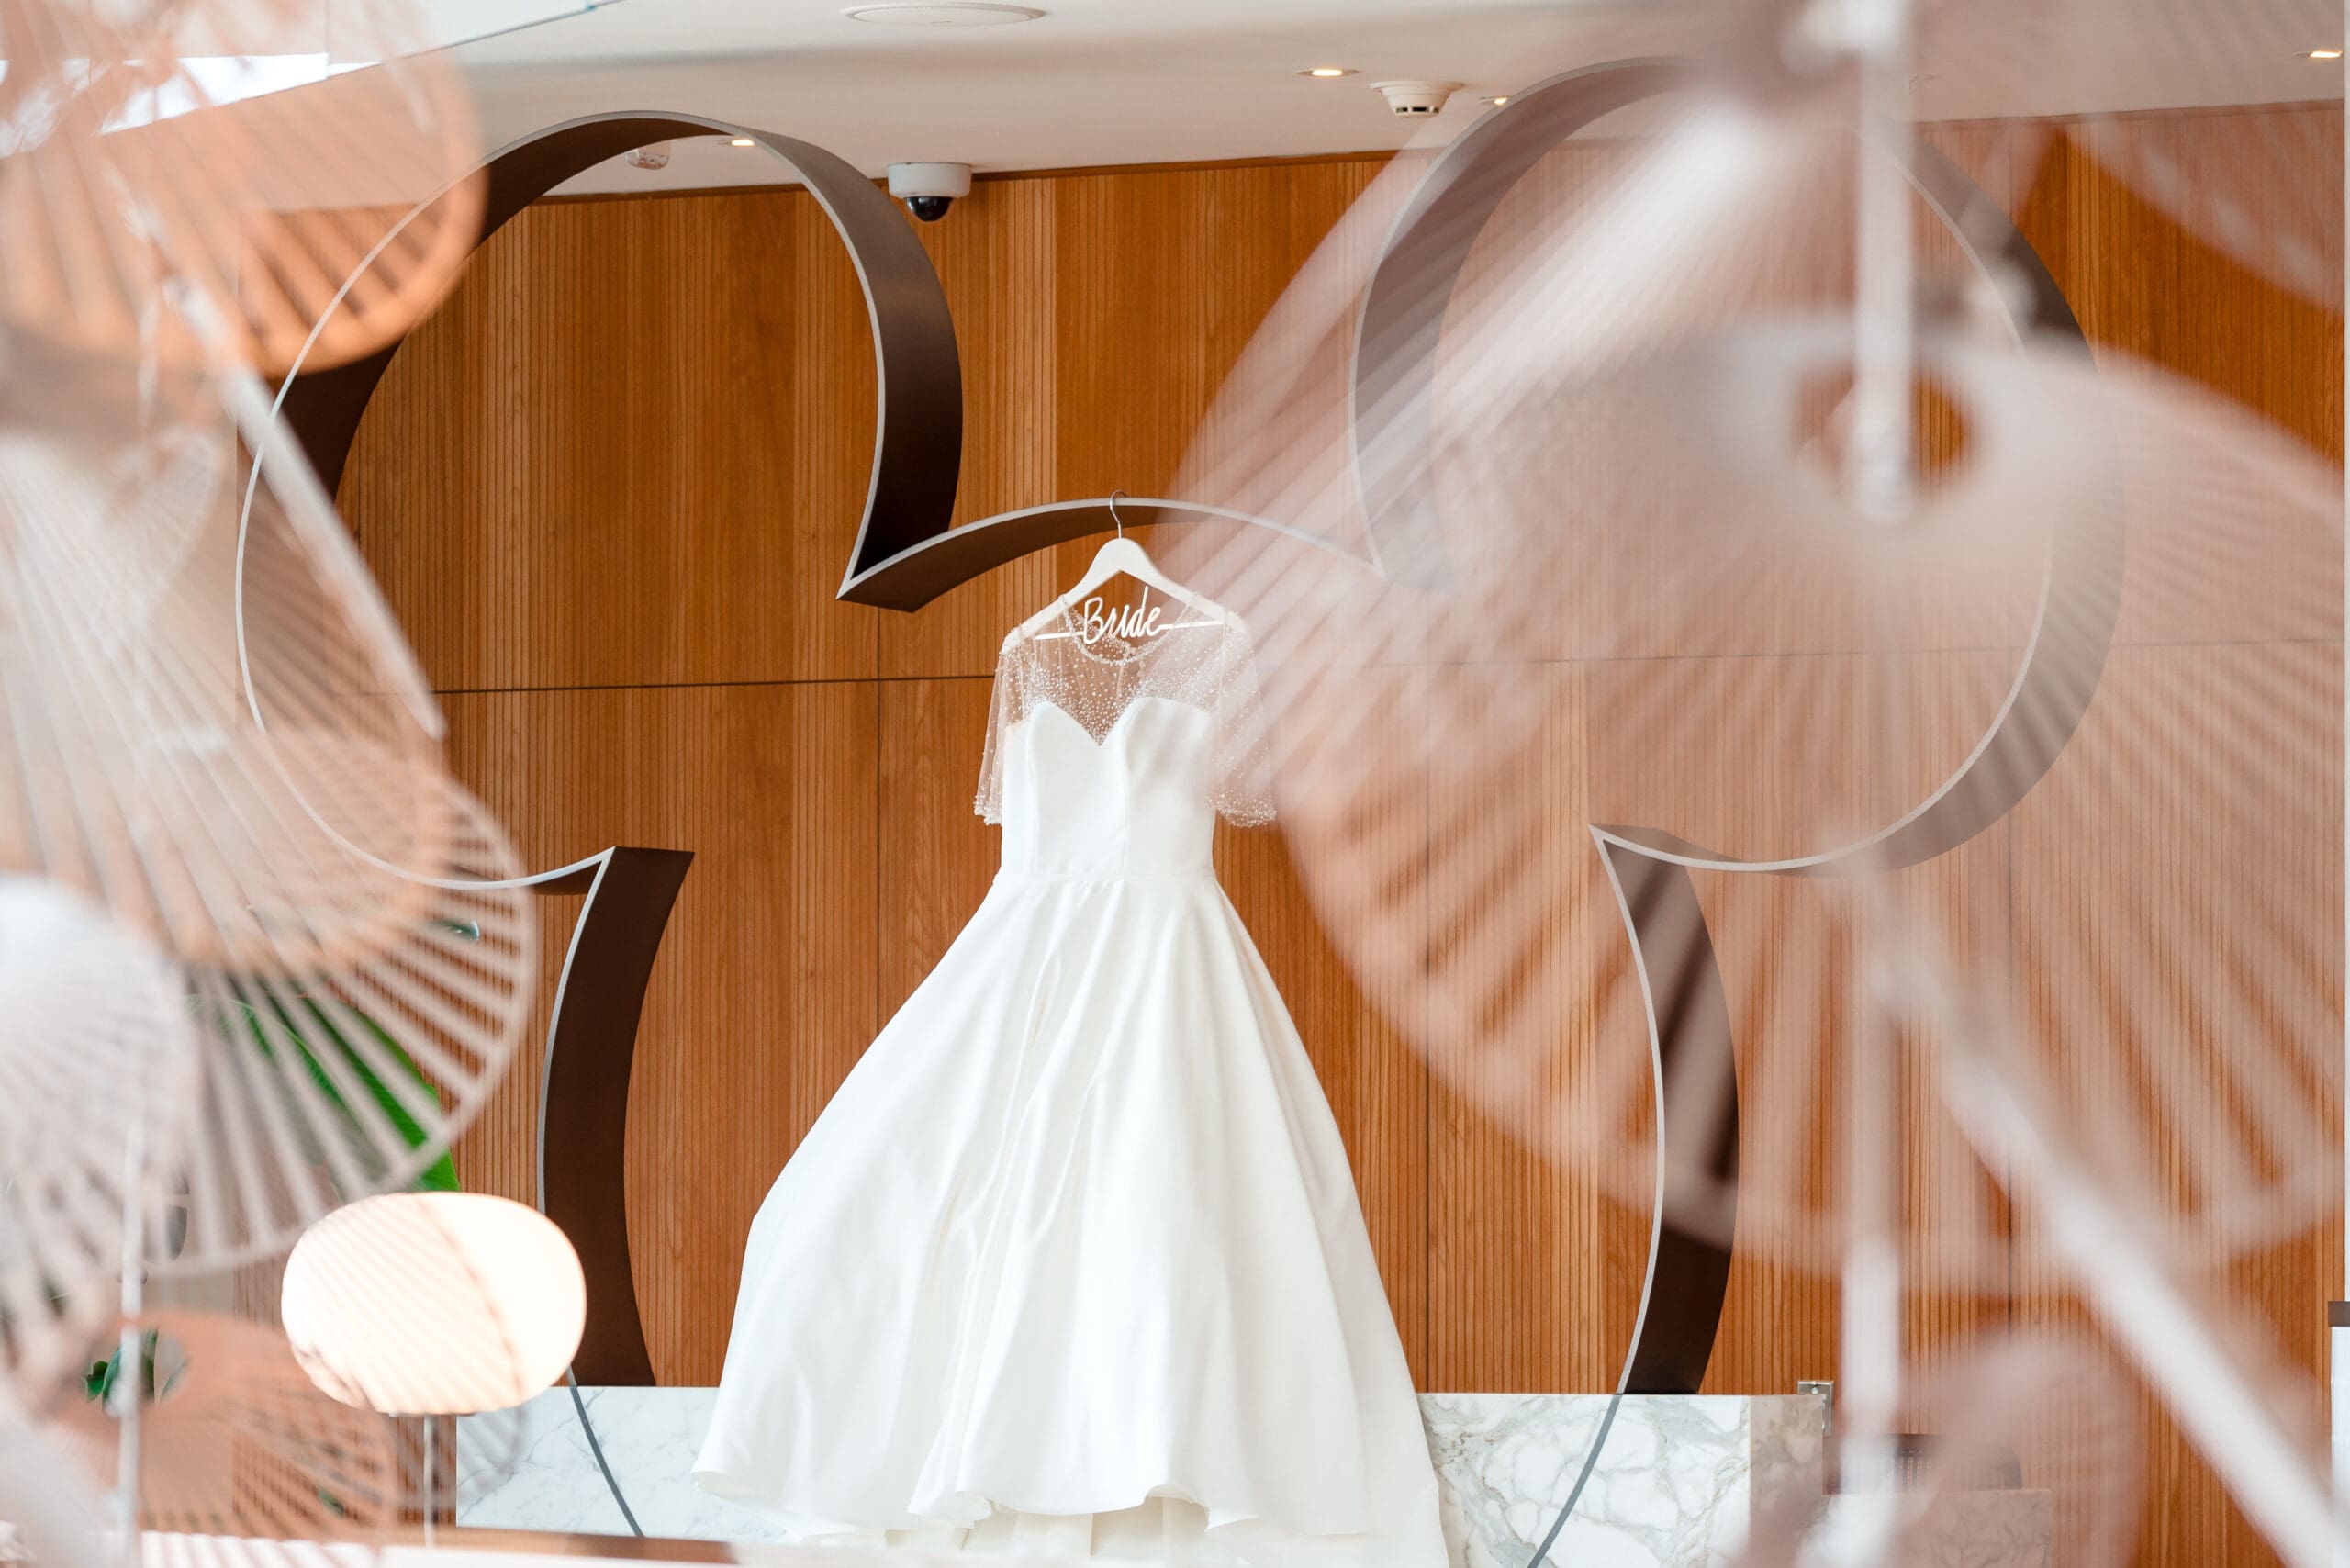 A wedding dress hanging within a wooden Mickey Mouse ear silhouette, providing a unique and charming photo opportunity.